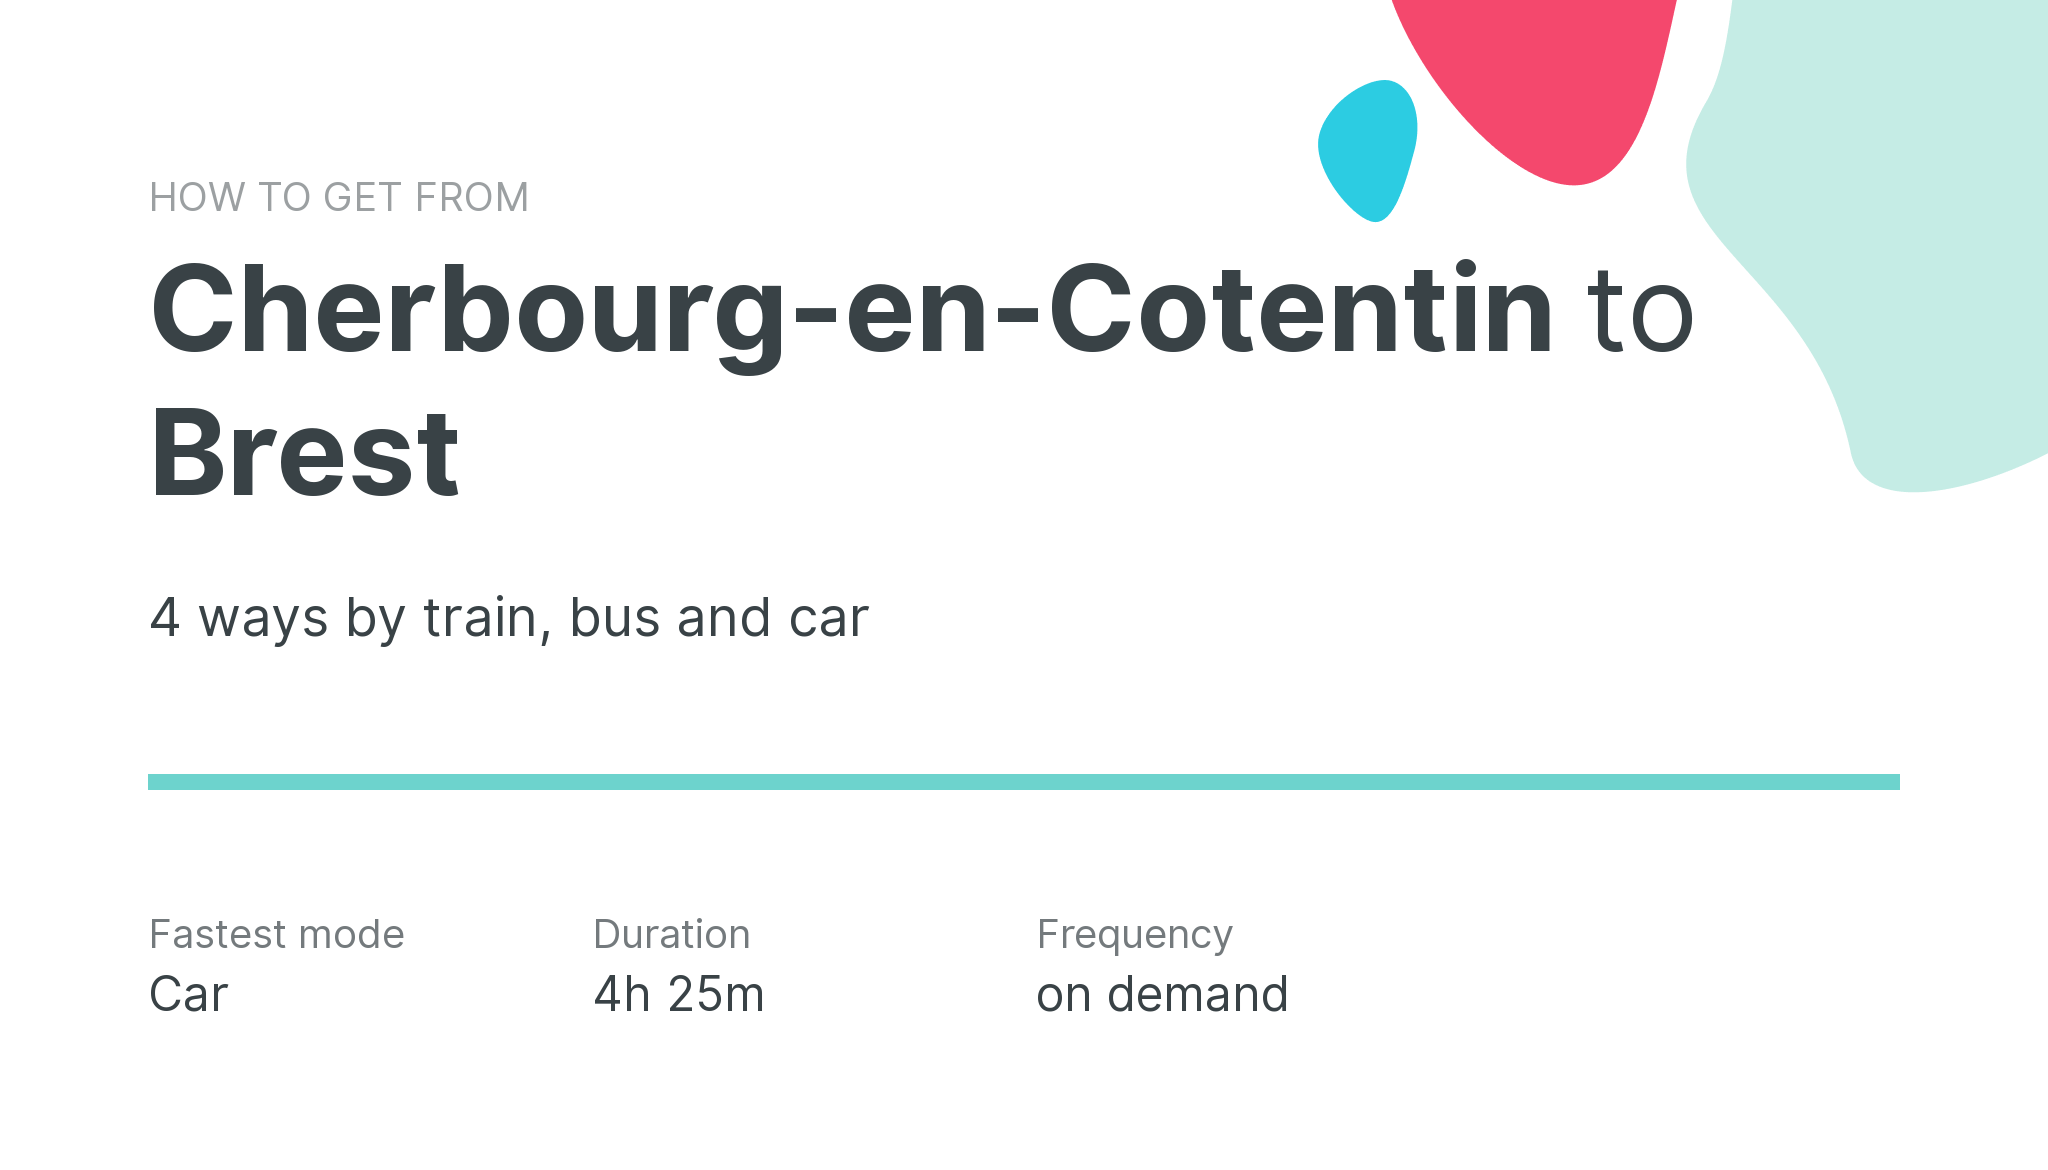 How do I get from Cherbourg-en-Cotentin to Brest